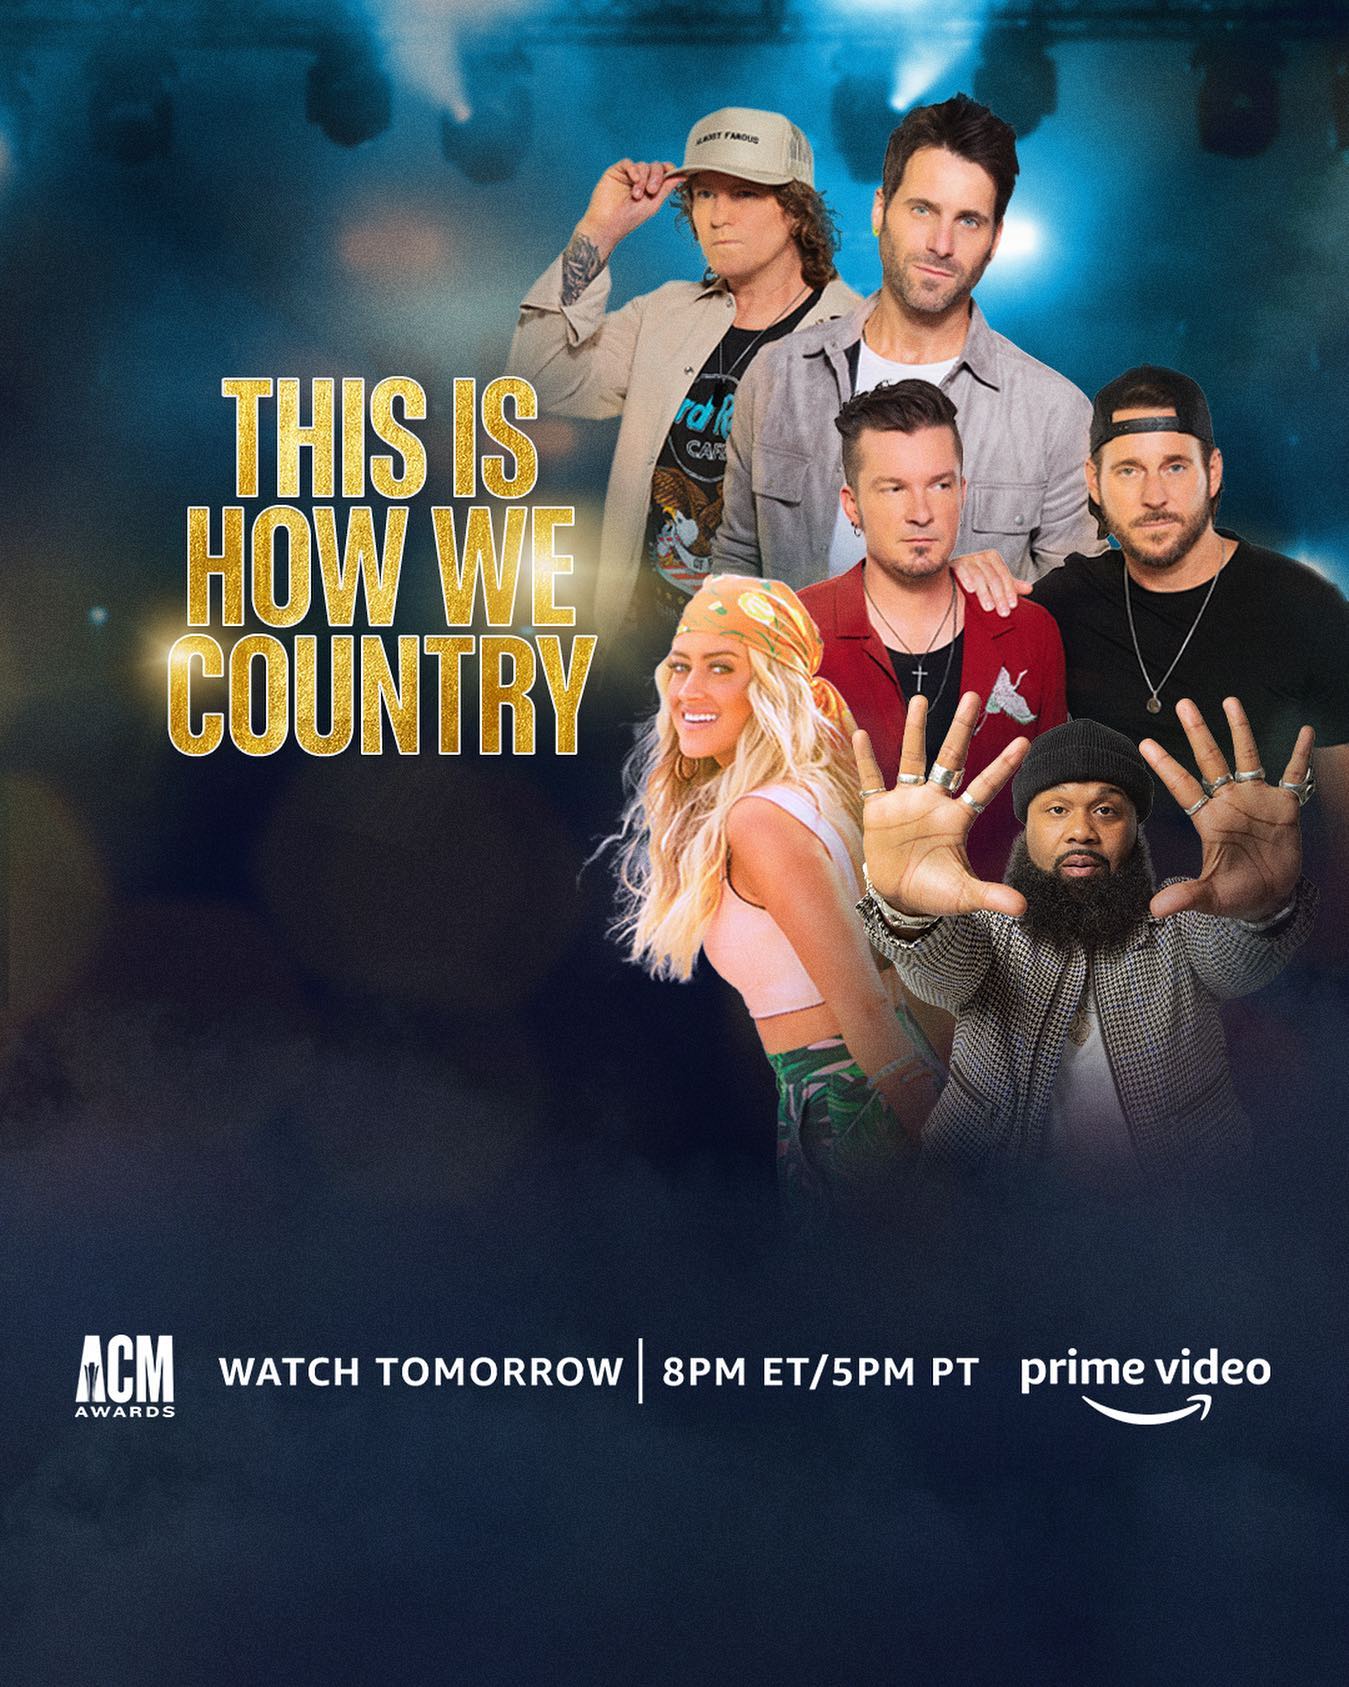 We’re in Vegas and ready for the @acmawards!! Don’t miss our performance  LIVE TOMORROW at 8pm ET/ 5pm PT on @primevideo at @allegiantstadium